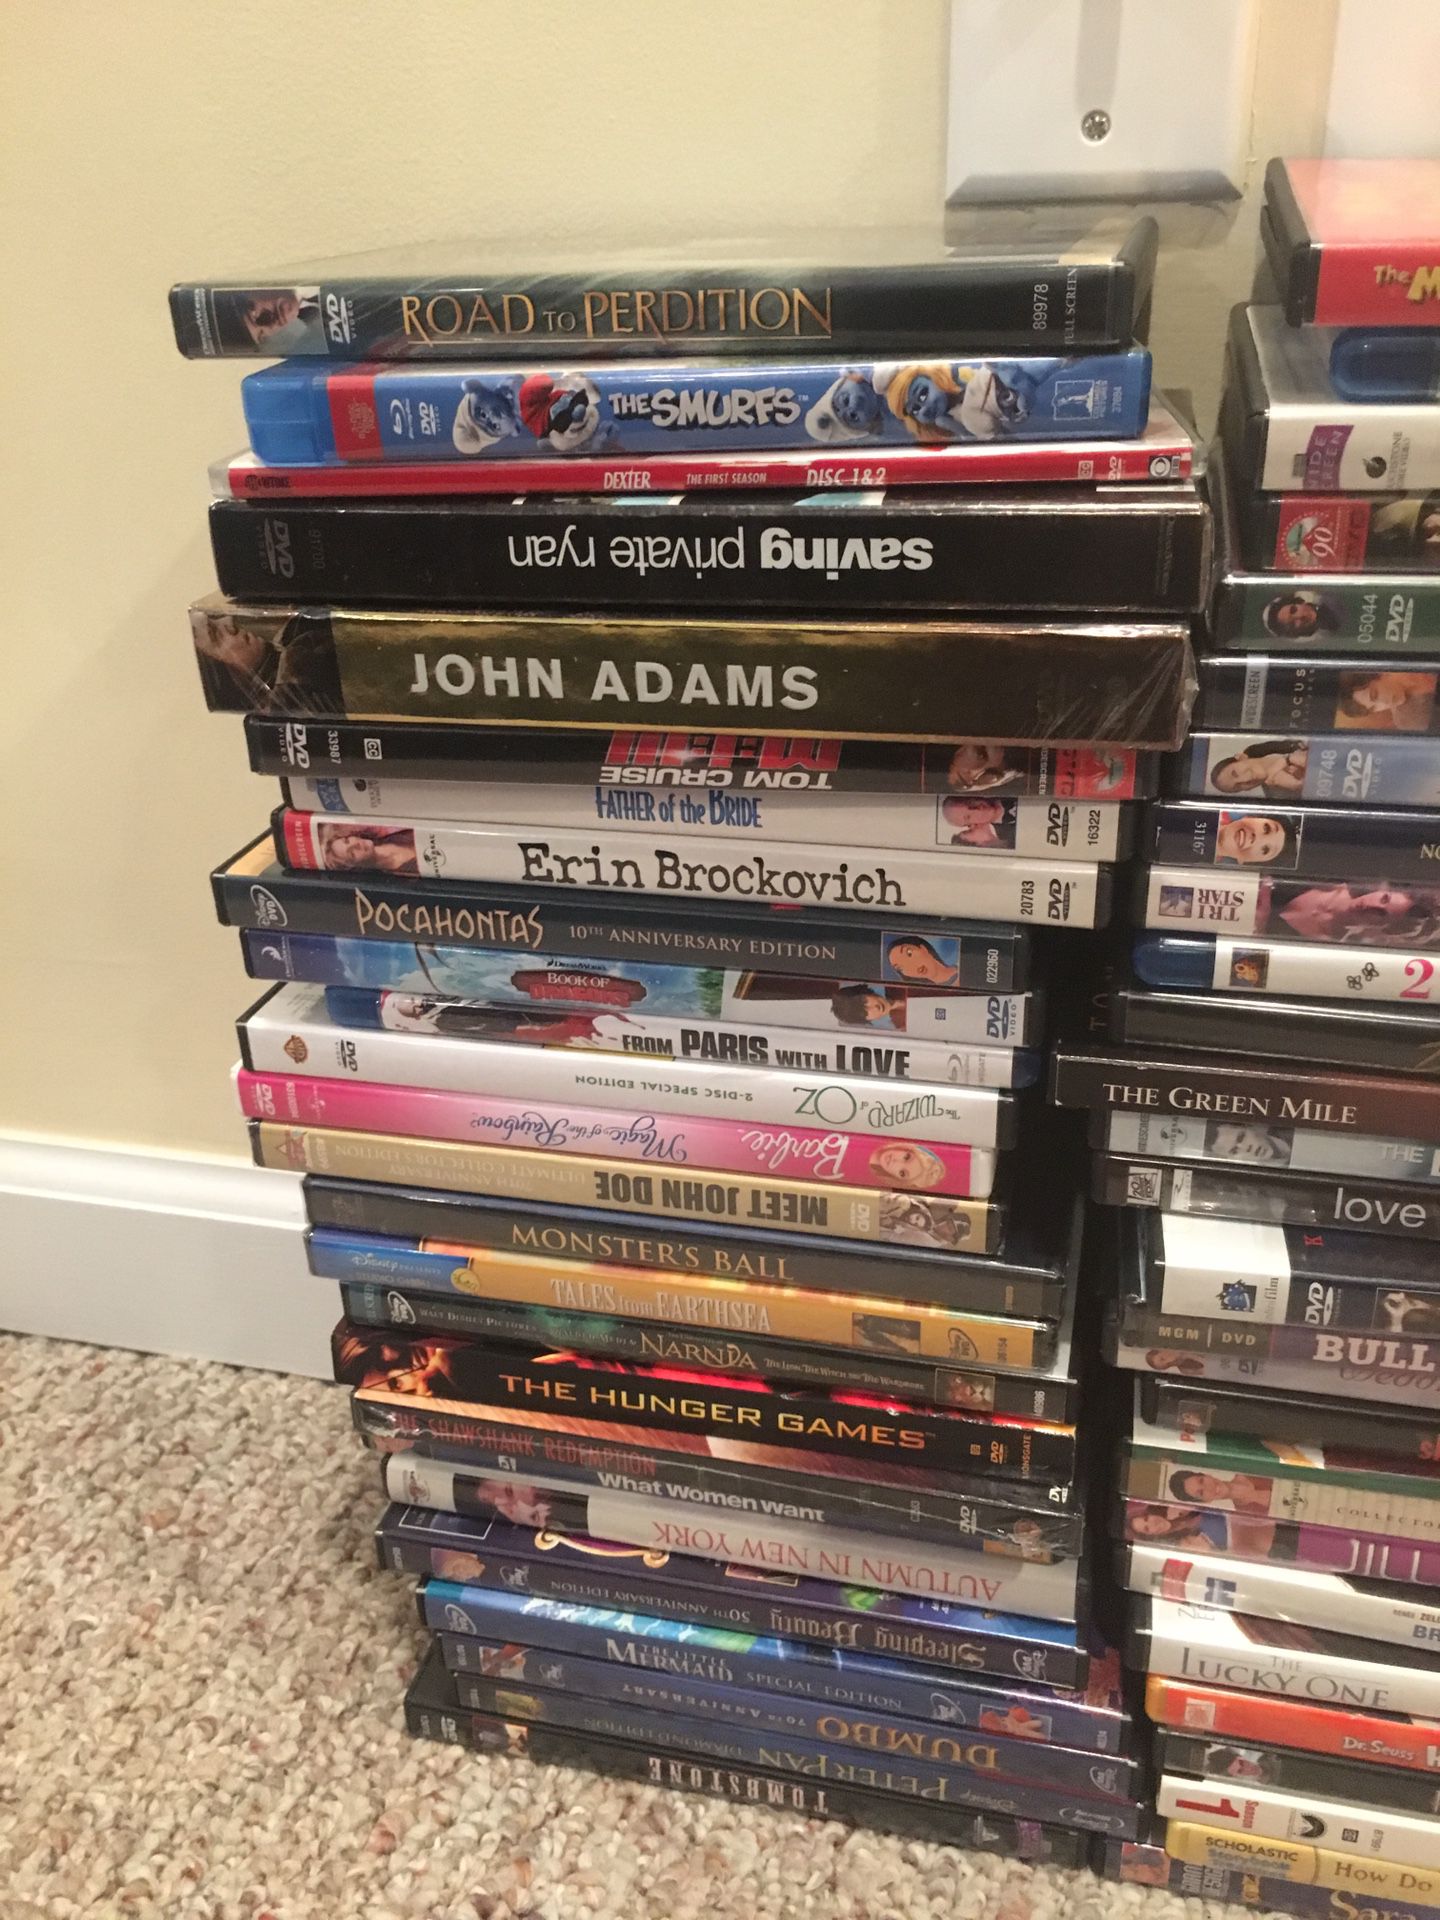 Over 150 DVDs!